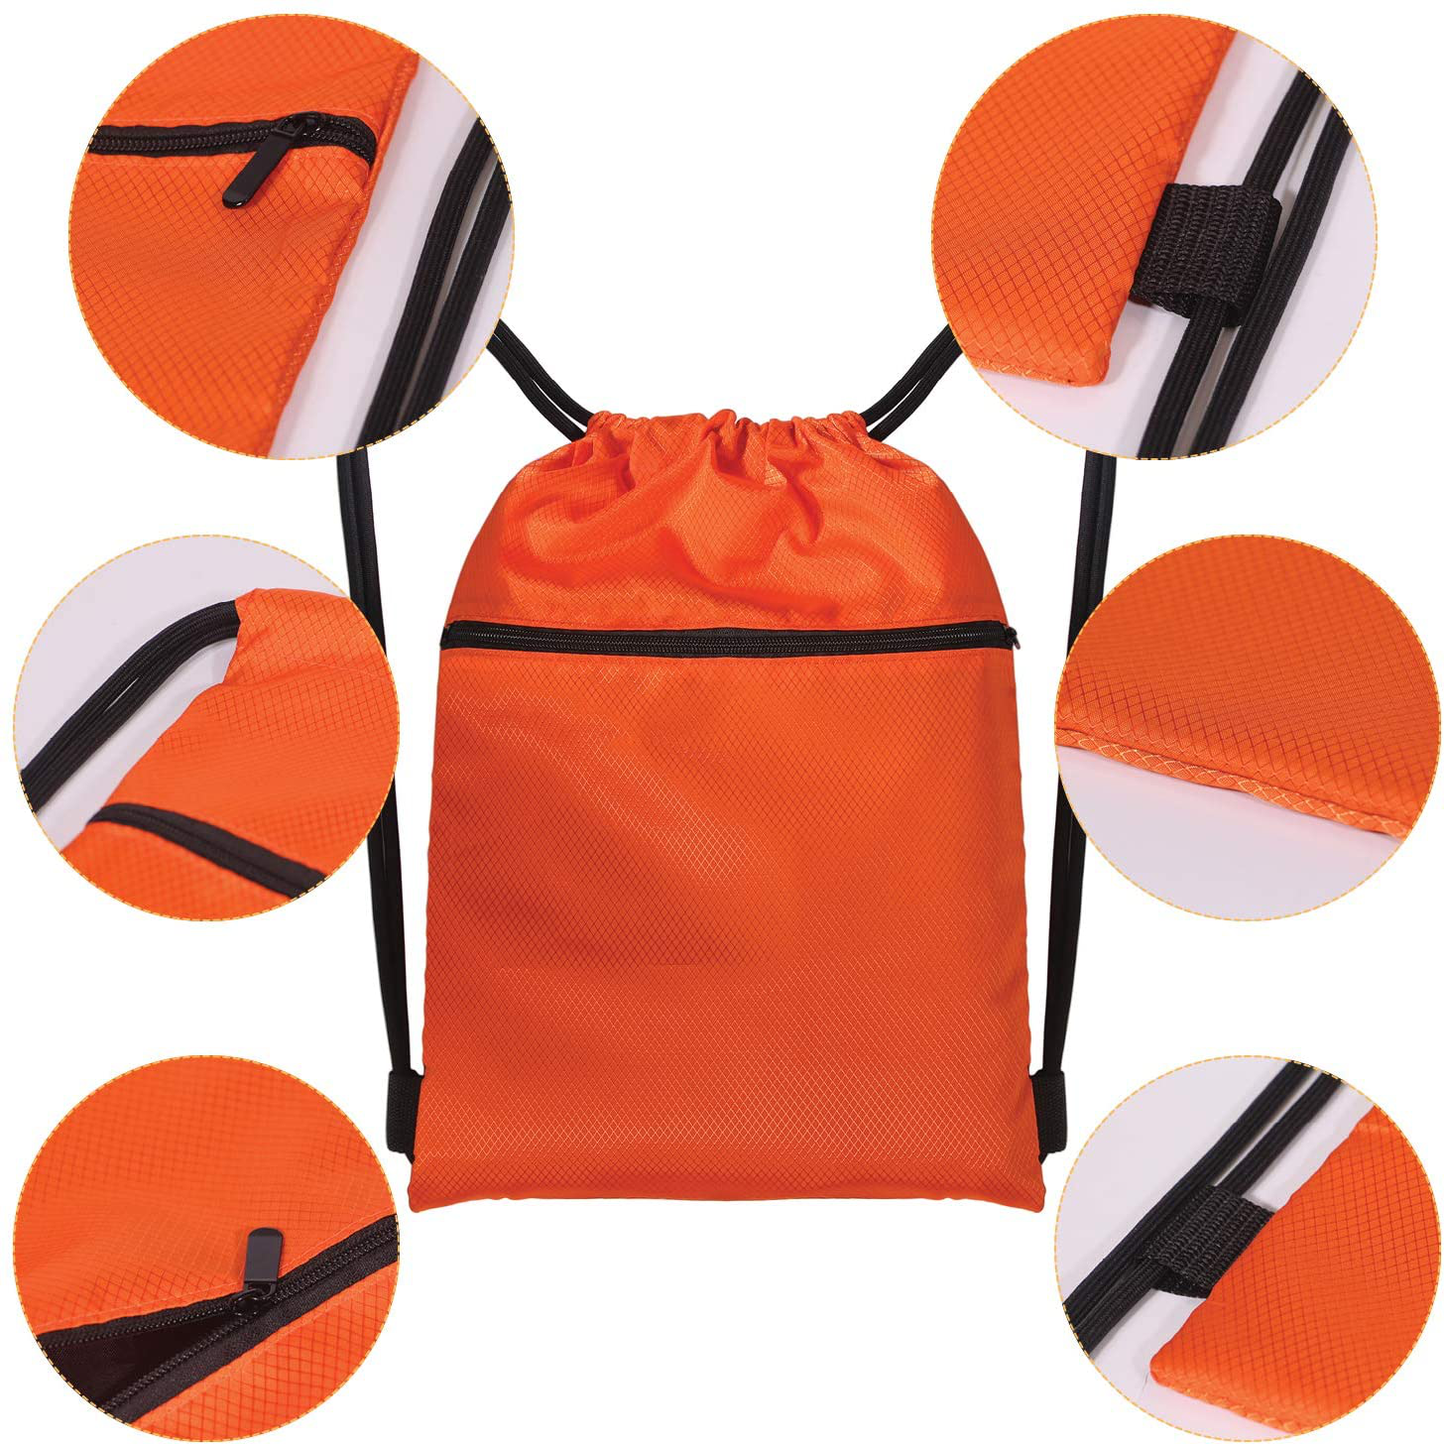 Drawstring Strings Bags with Pockets Sports Athletic School Travel Gym Cinch Sack Lightweight Backpack for Men and Women, Orange